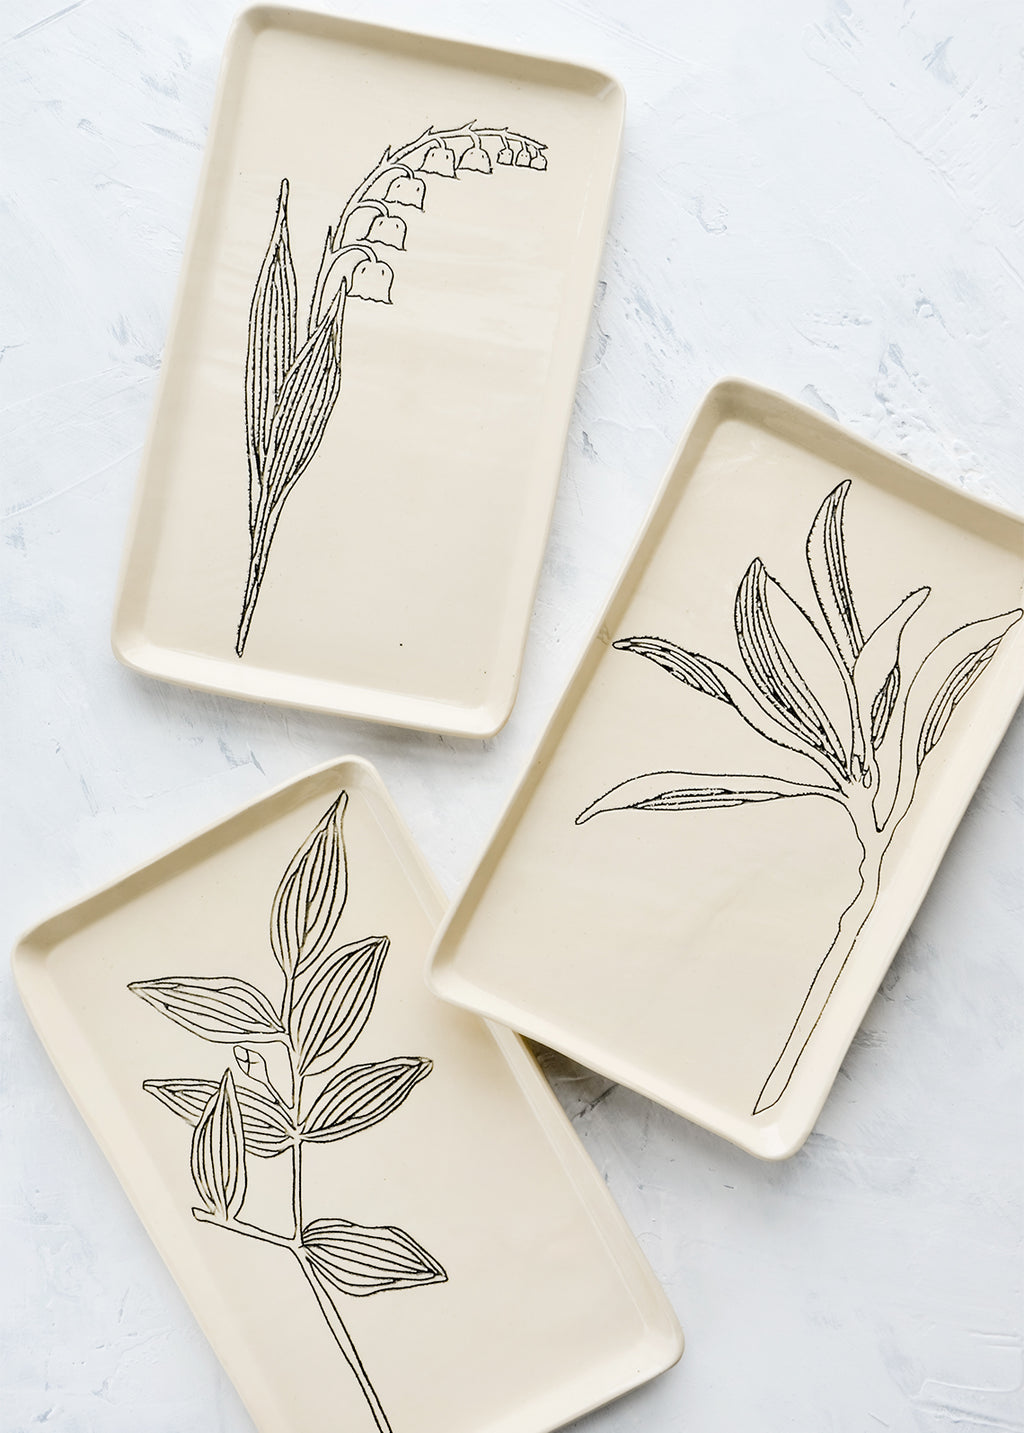 1: Rectangular ceramic trays in natural bisque color with etched black botanical drawings